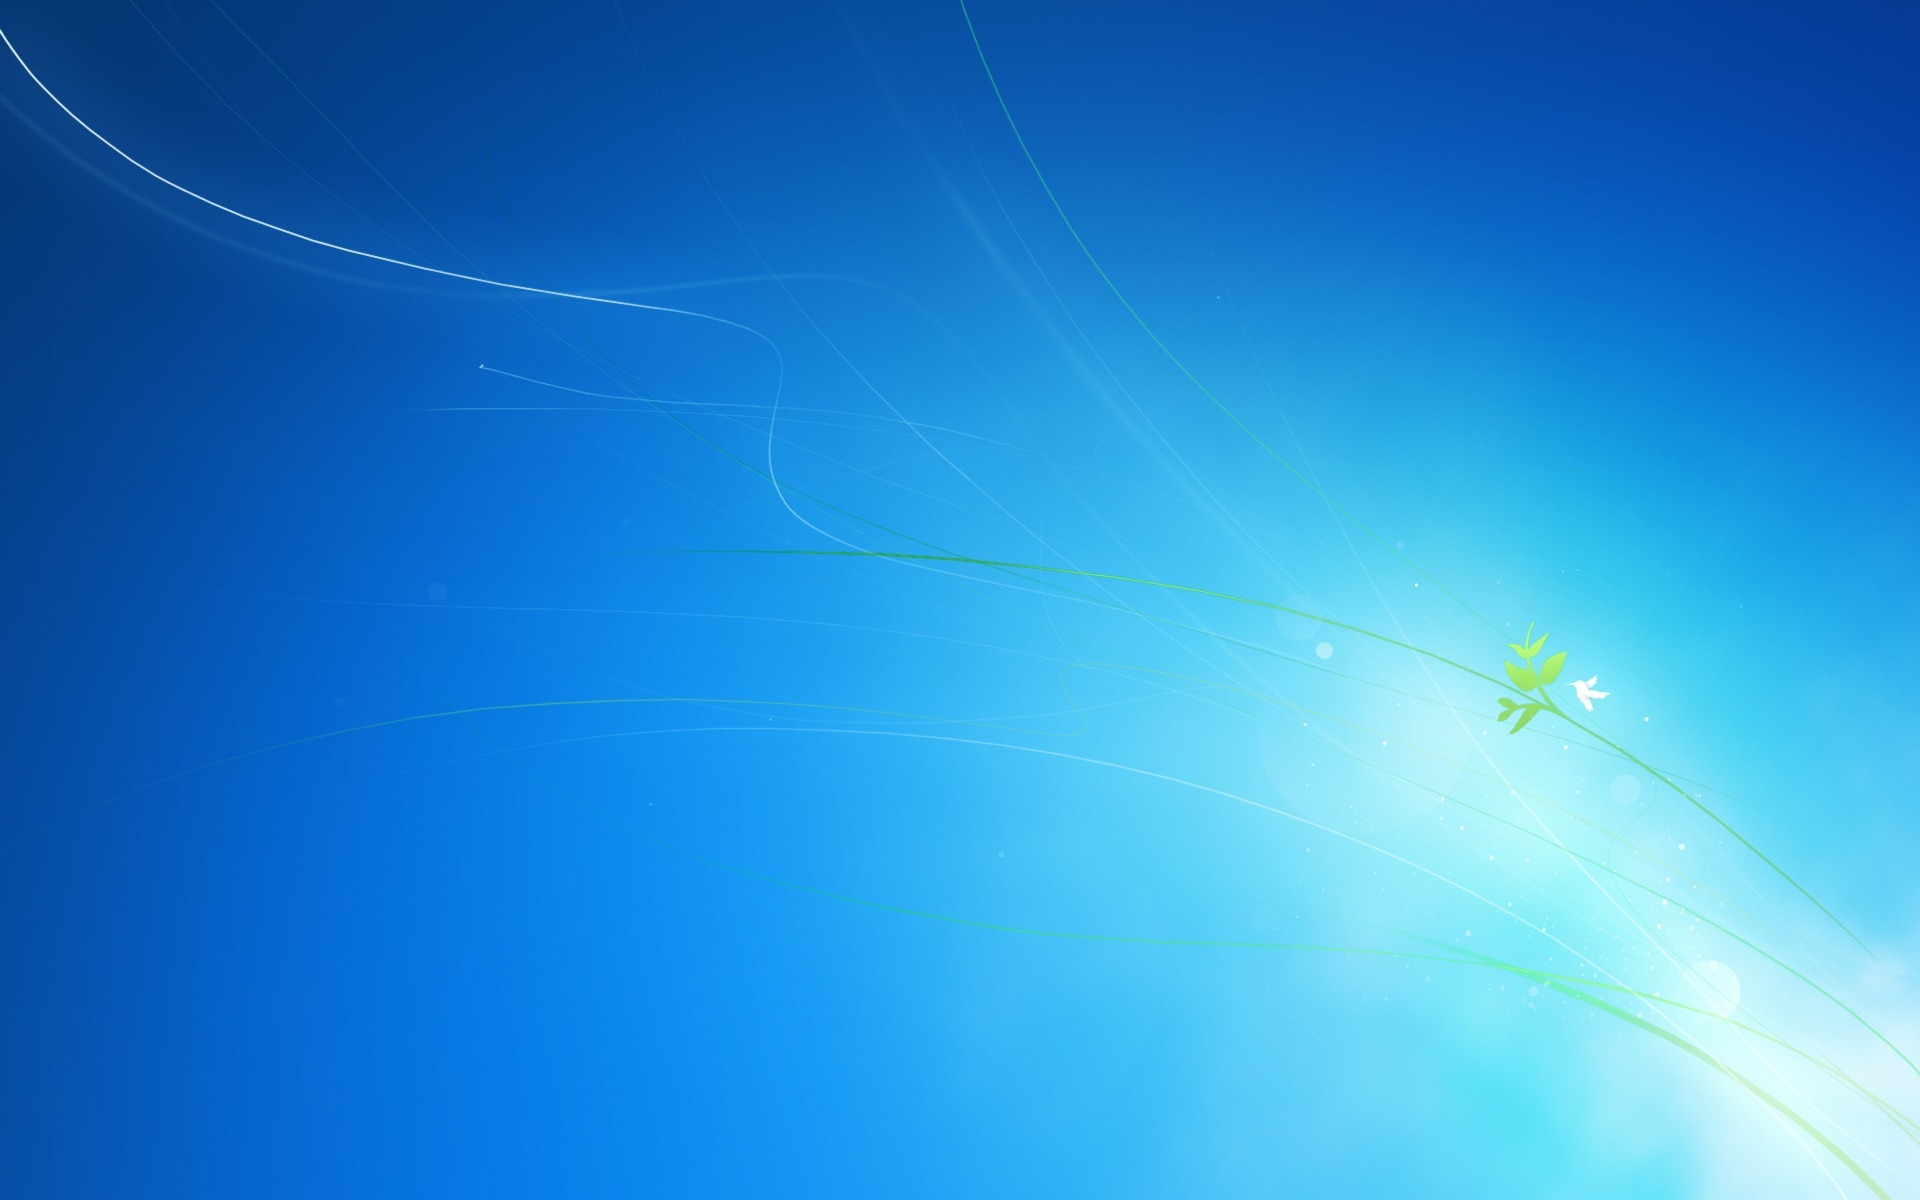 Windows 7 logon screen as your wallpaper theskywaspink